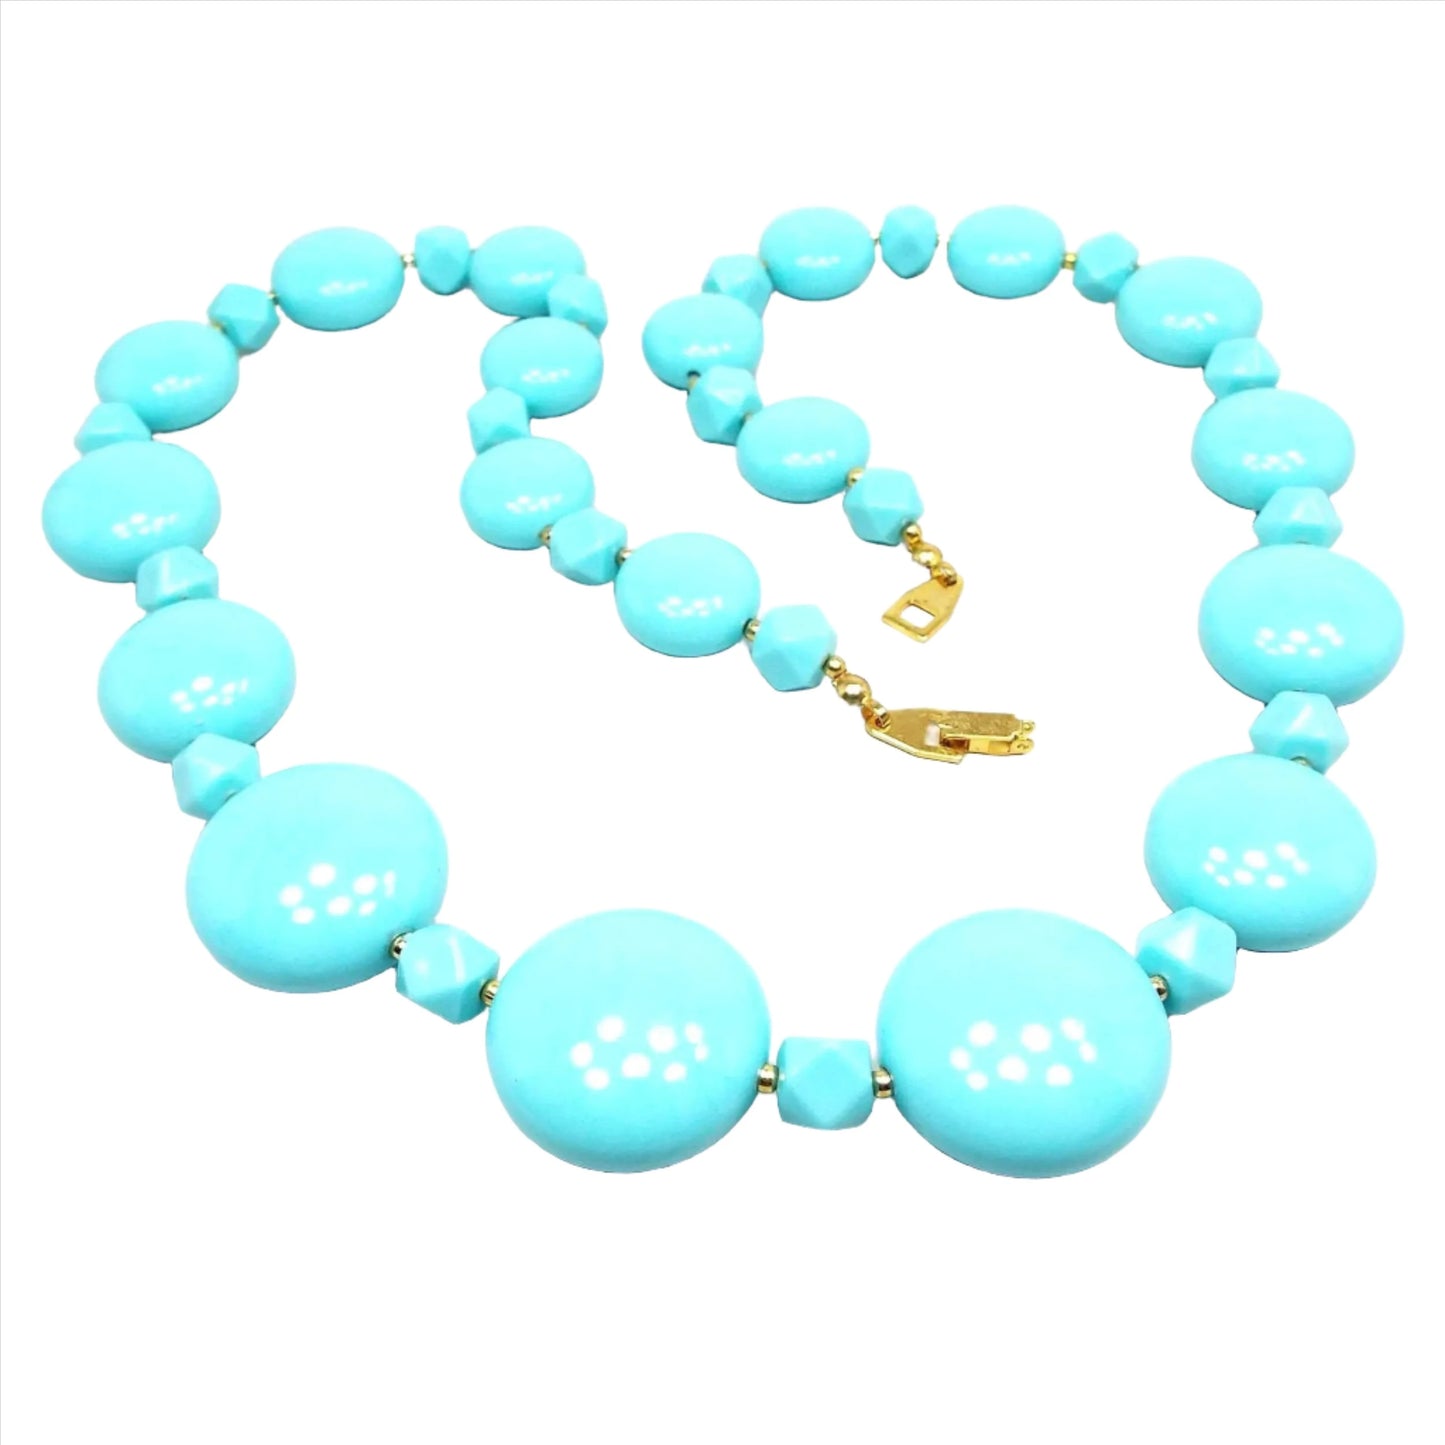 Front view of the retro vintage lucite beaded necklace. The beads are aqua blue in color. There is a gold tone plated snap lock clasp at the end. The beads are flat round pillow shaped with faceted beads in between.